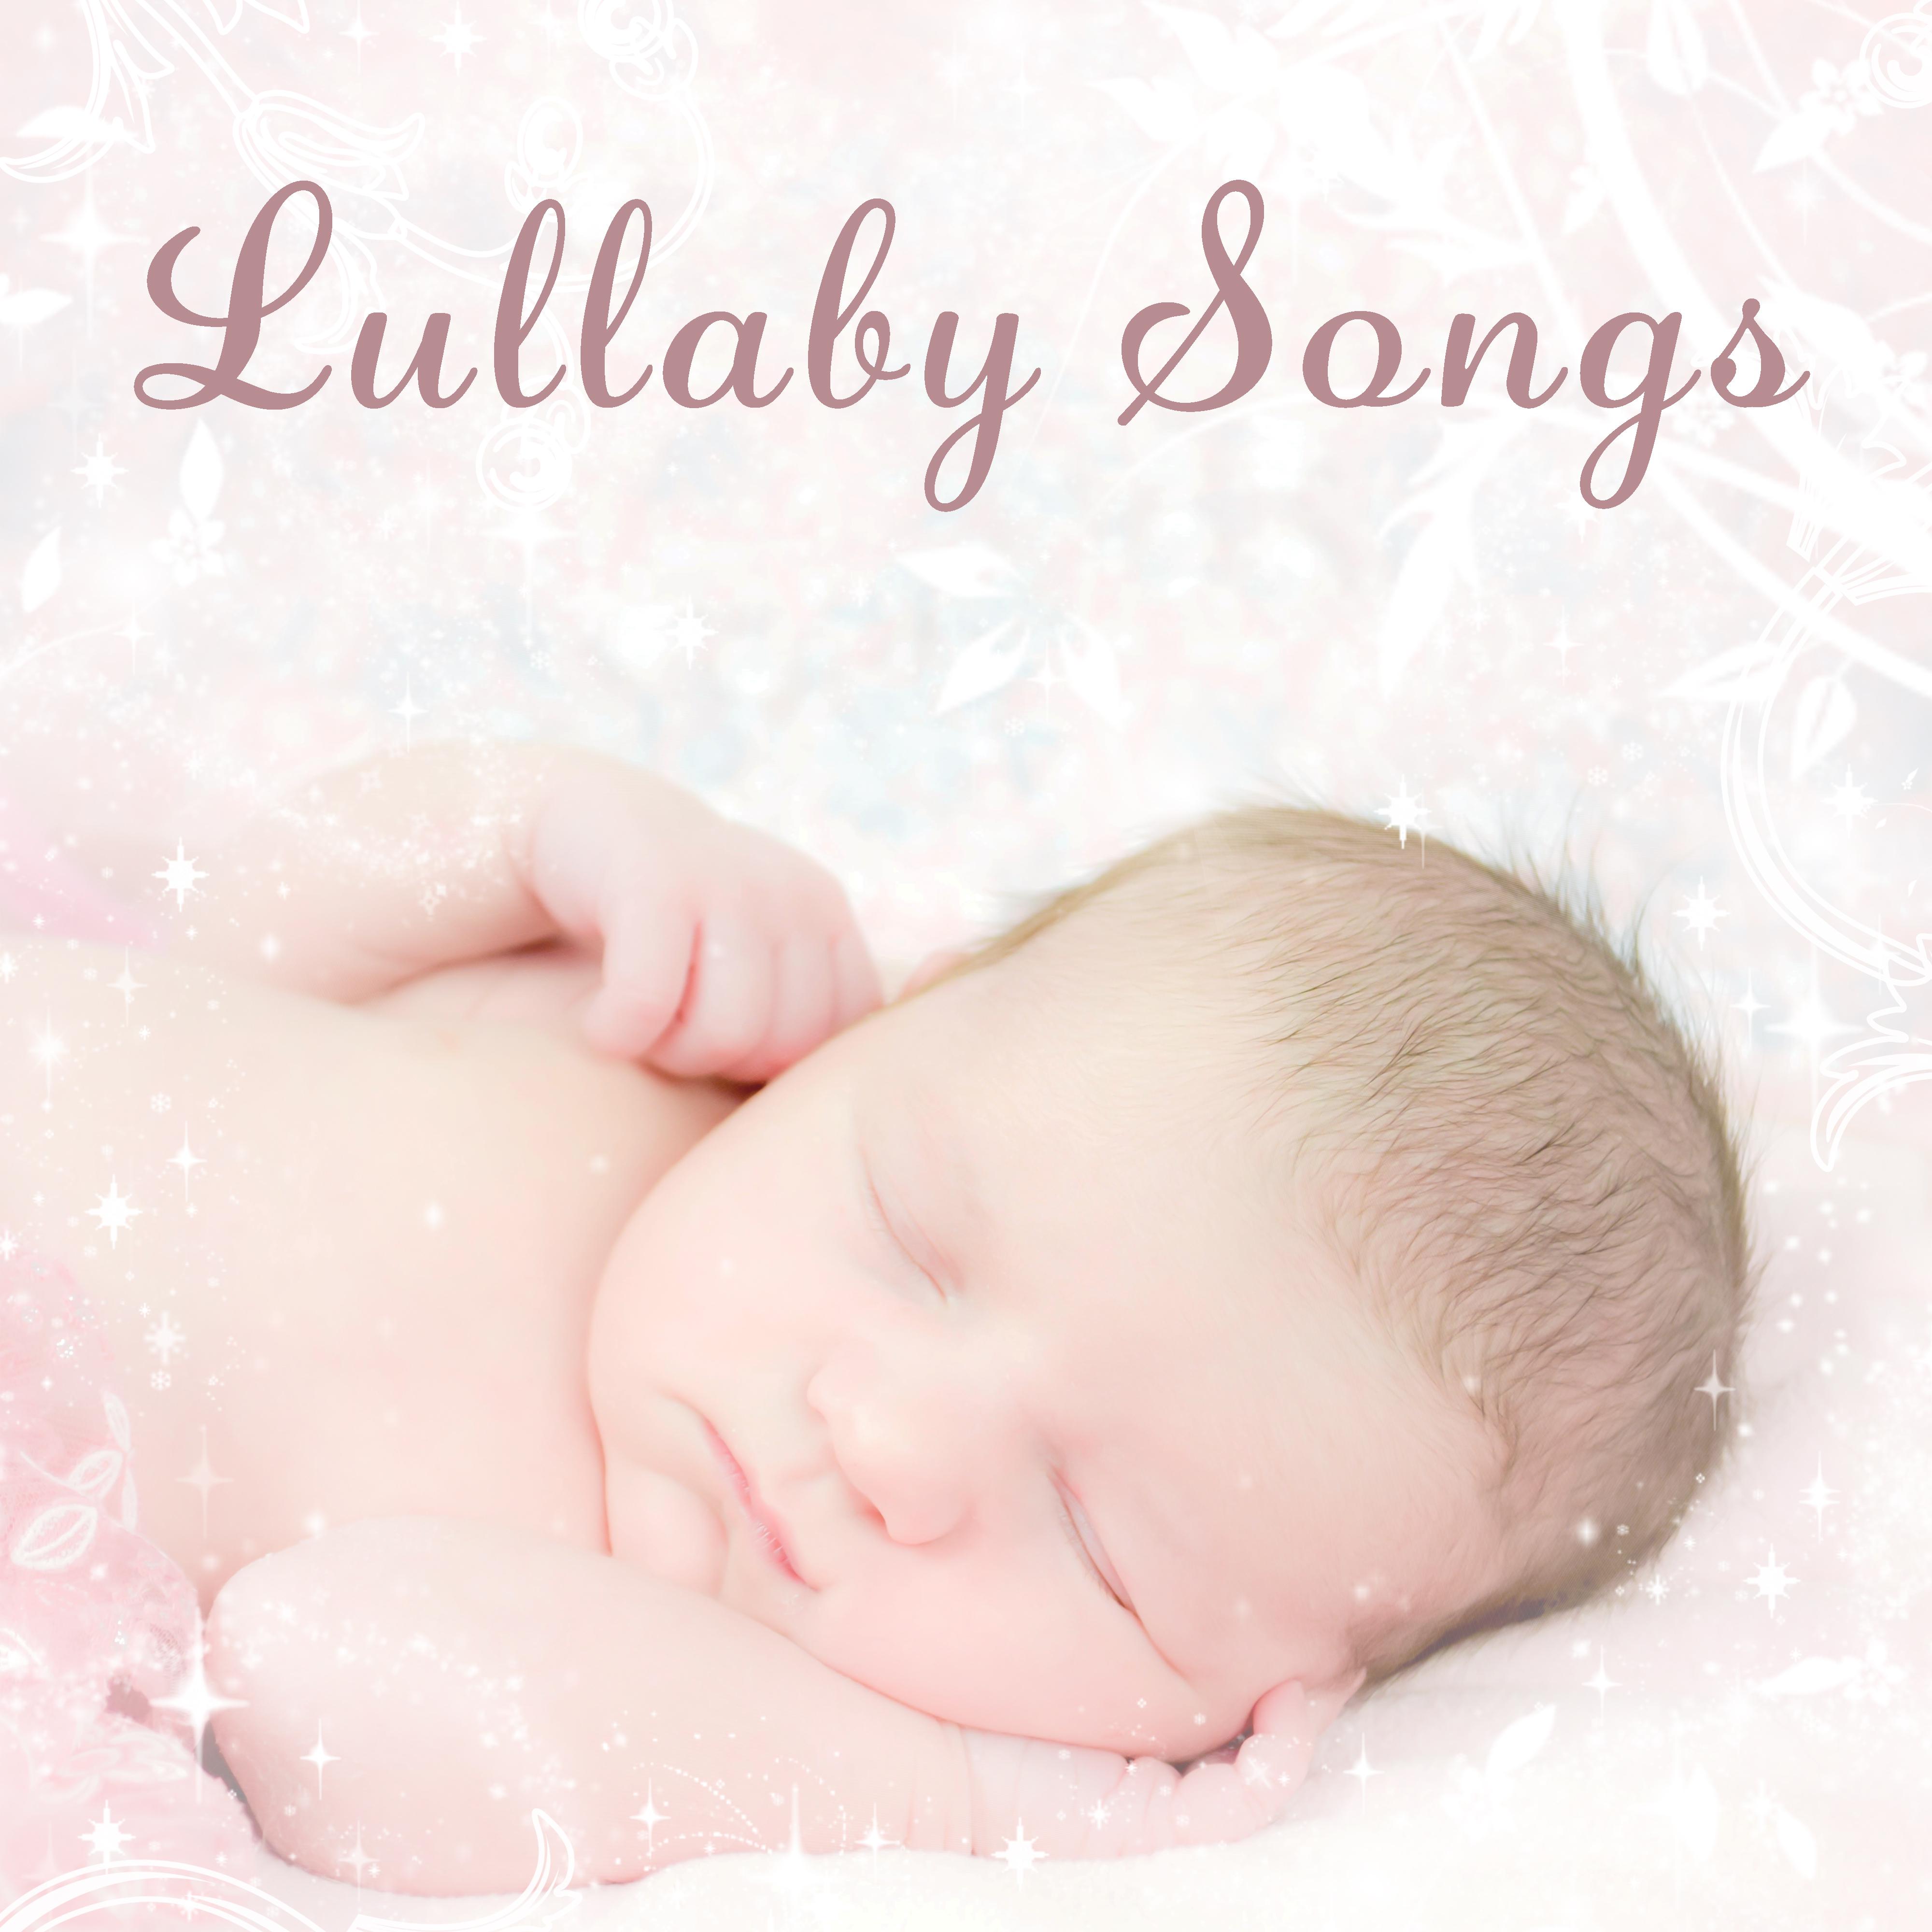 Lullaby Songs – Calming New Age Lullabies, Nature Sounds, Relaxing Music, White Noise, Sleep Music for Babies